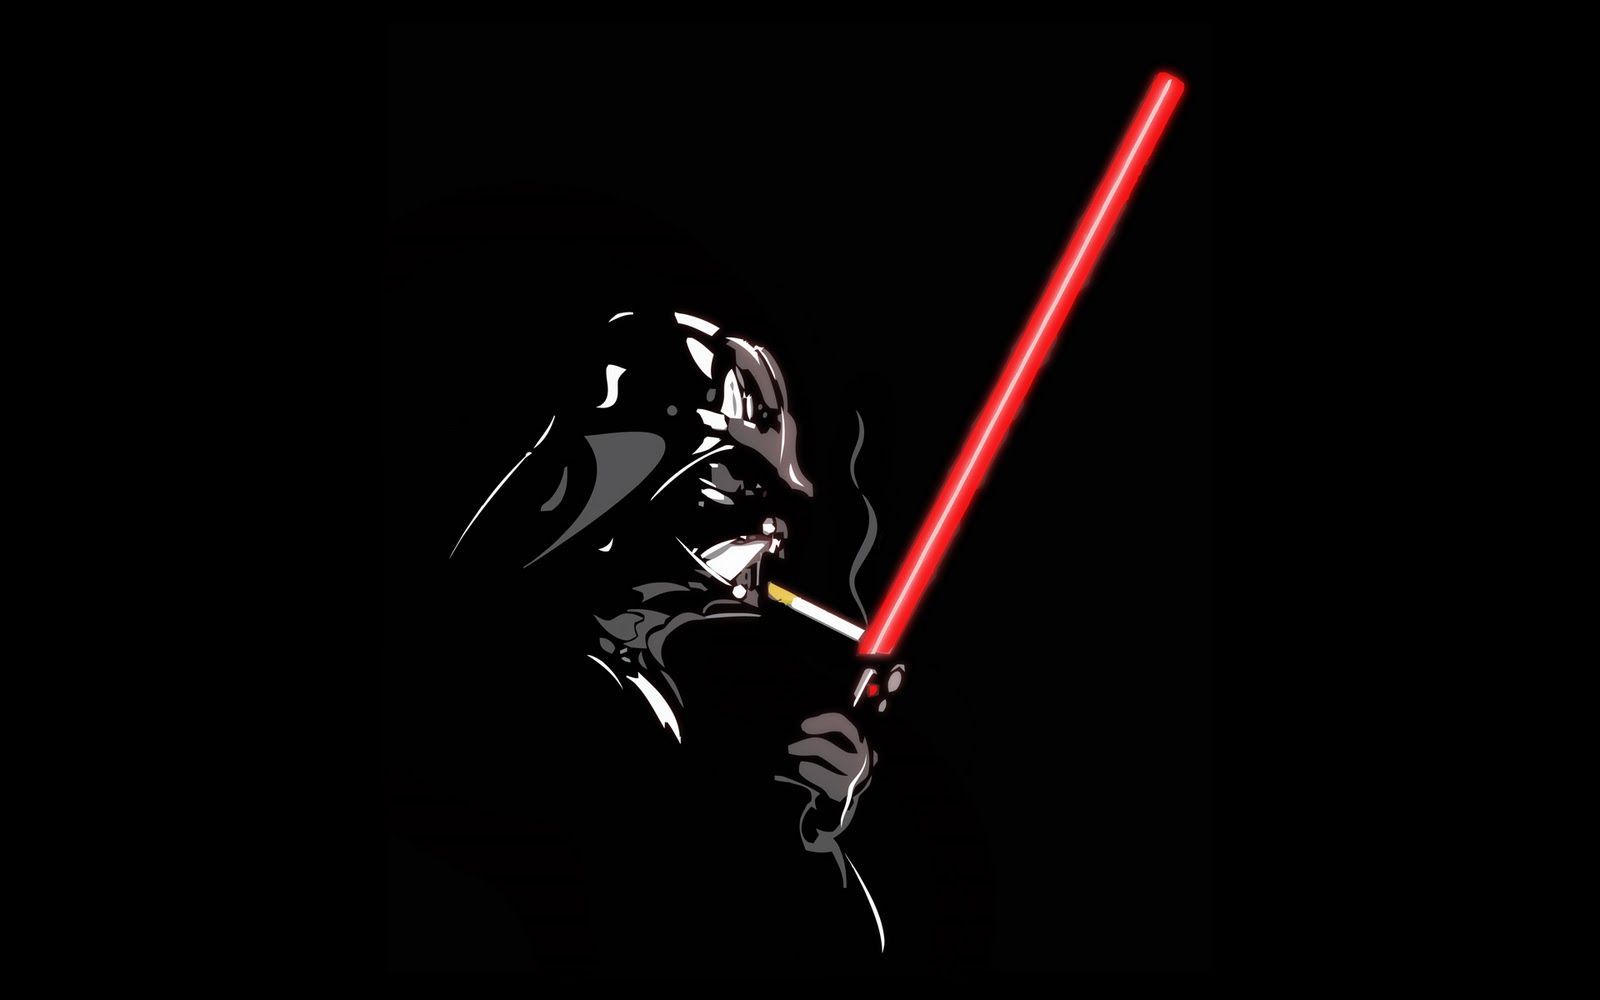 Ubuntu Made Easy: Epic wallpaper Thread. Link yours in the comment with. Darth vader HD wallpaper, Star wars games, Darth vader